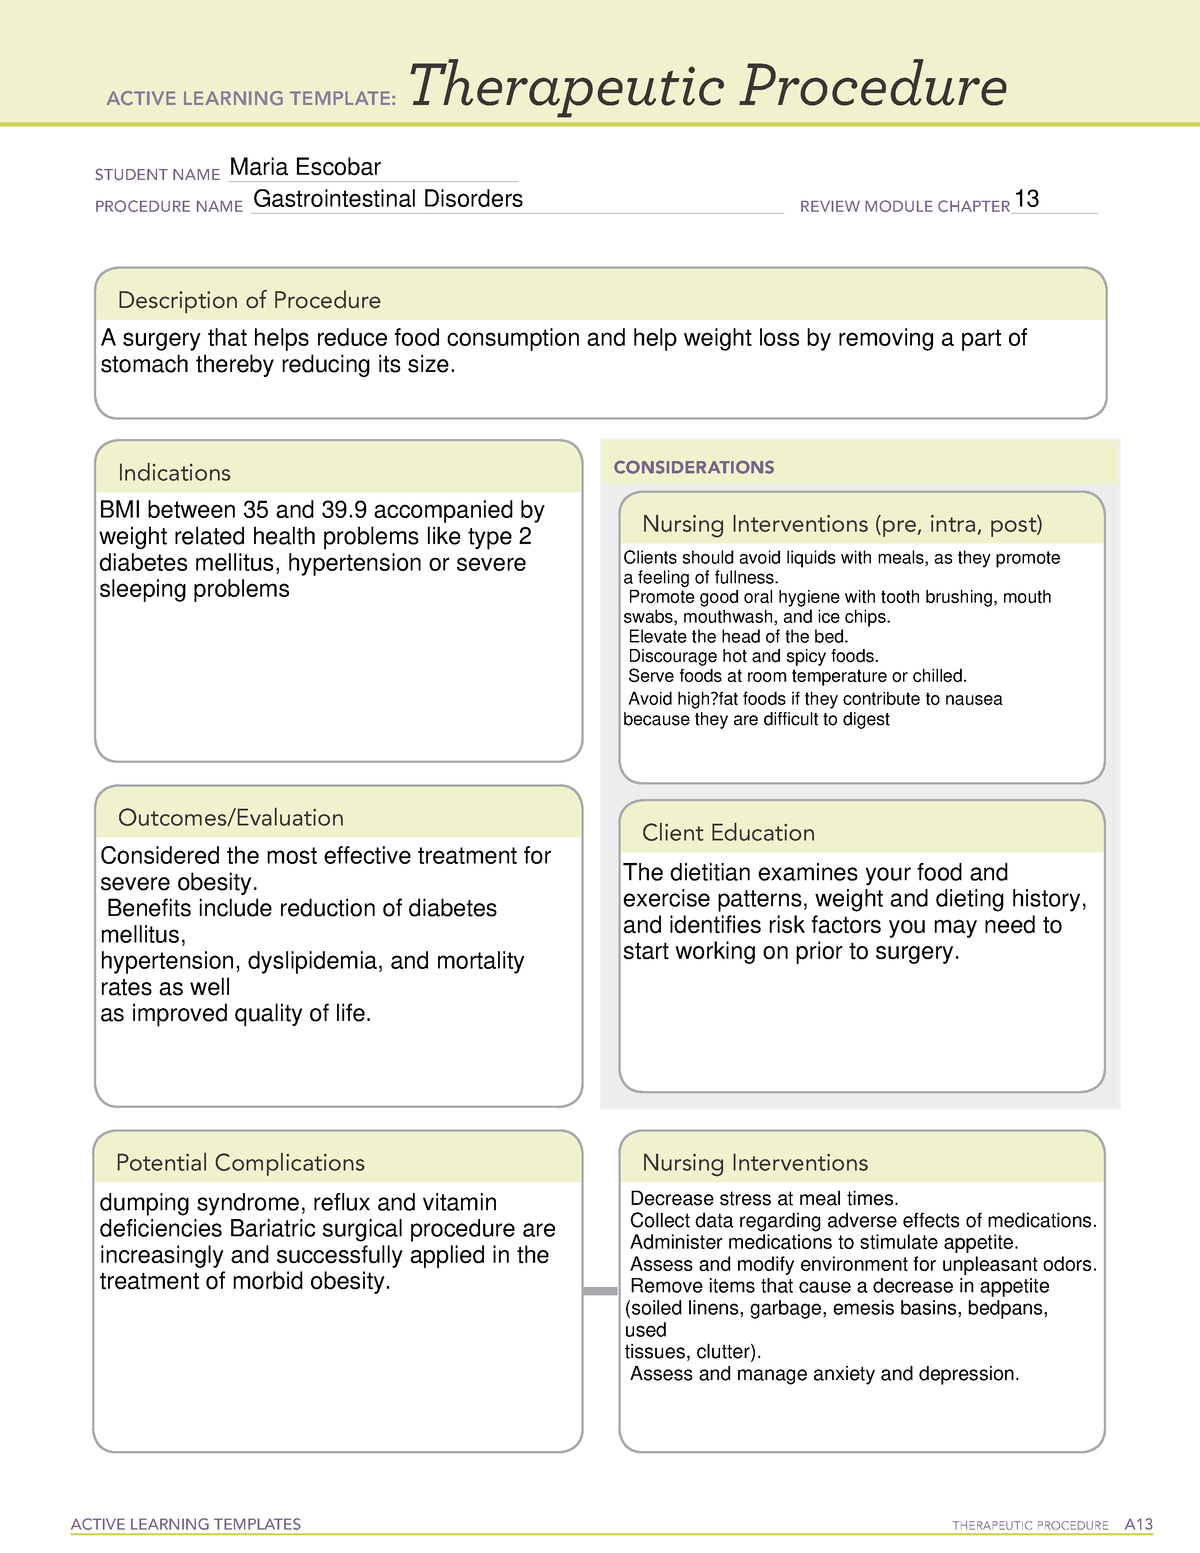 gastrointestinal-disorders-dietary-active-learning-templates